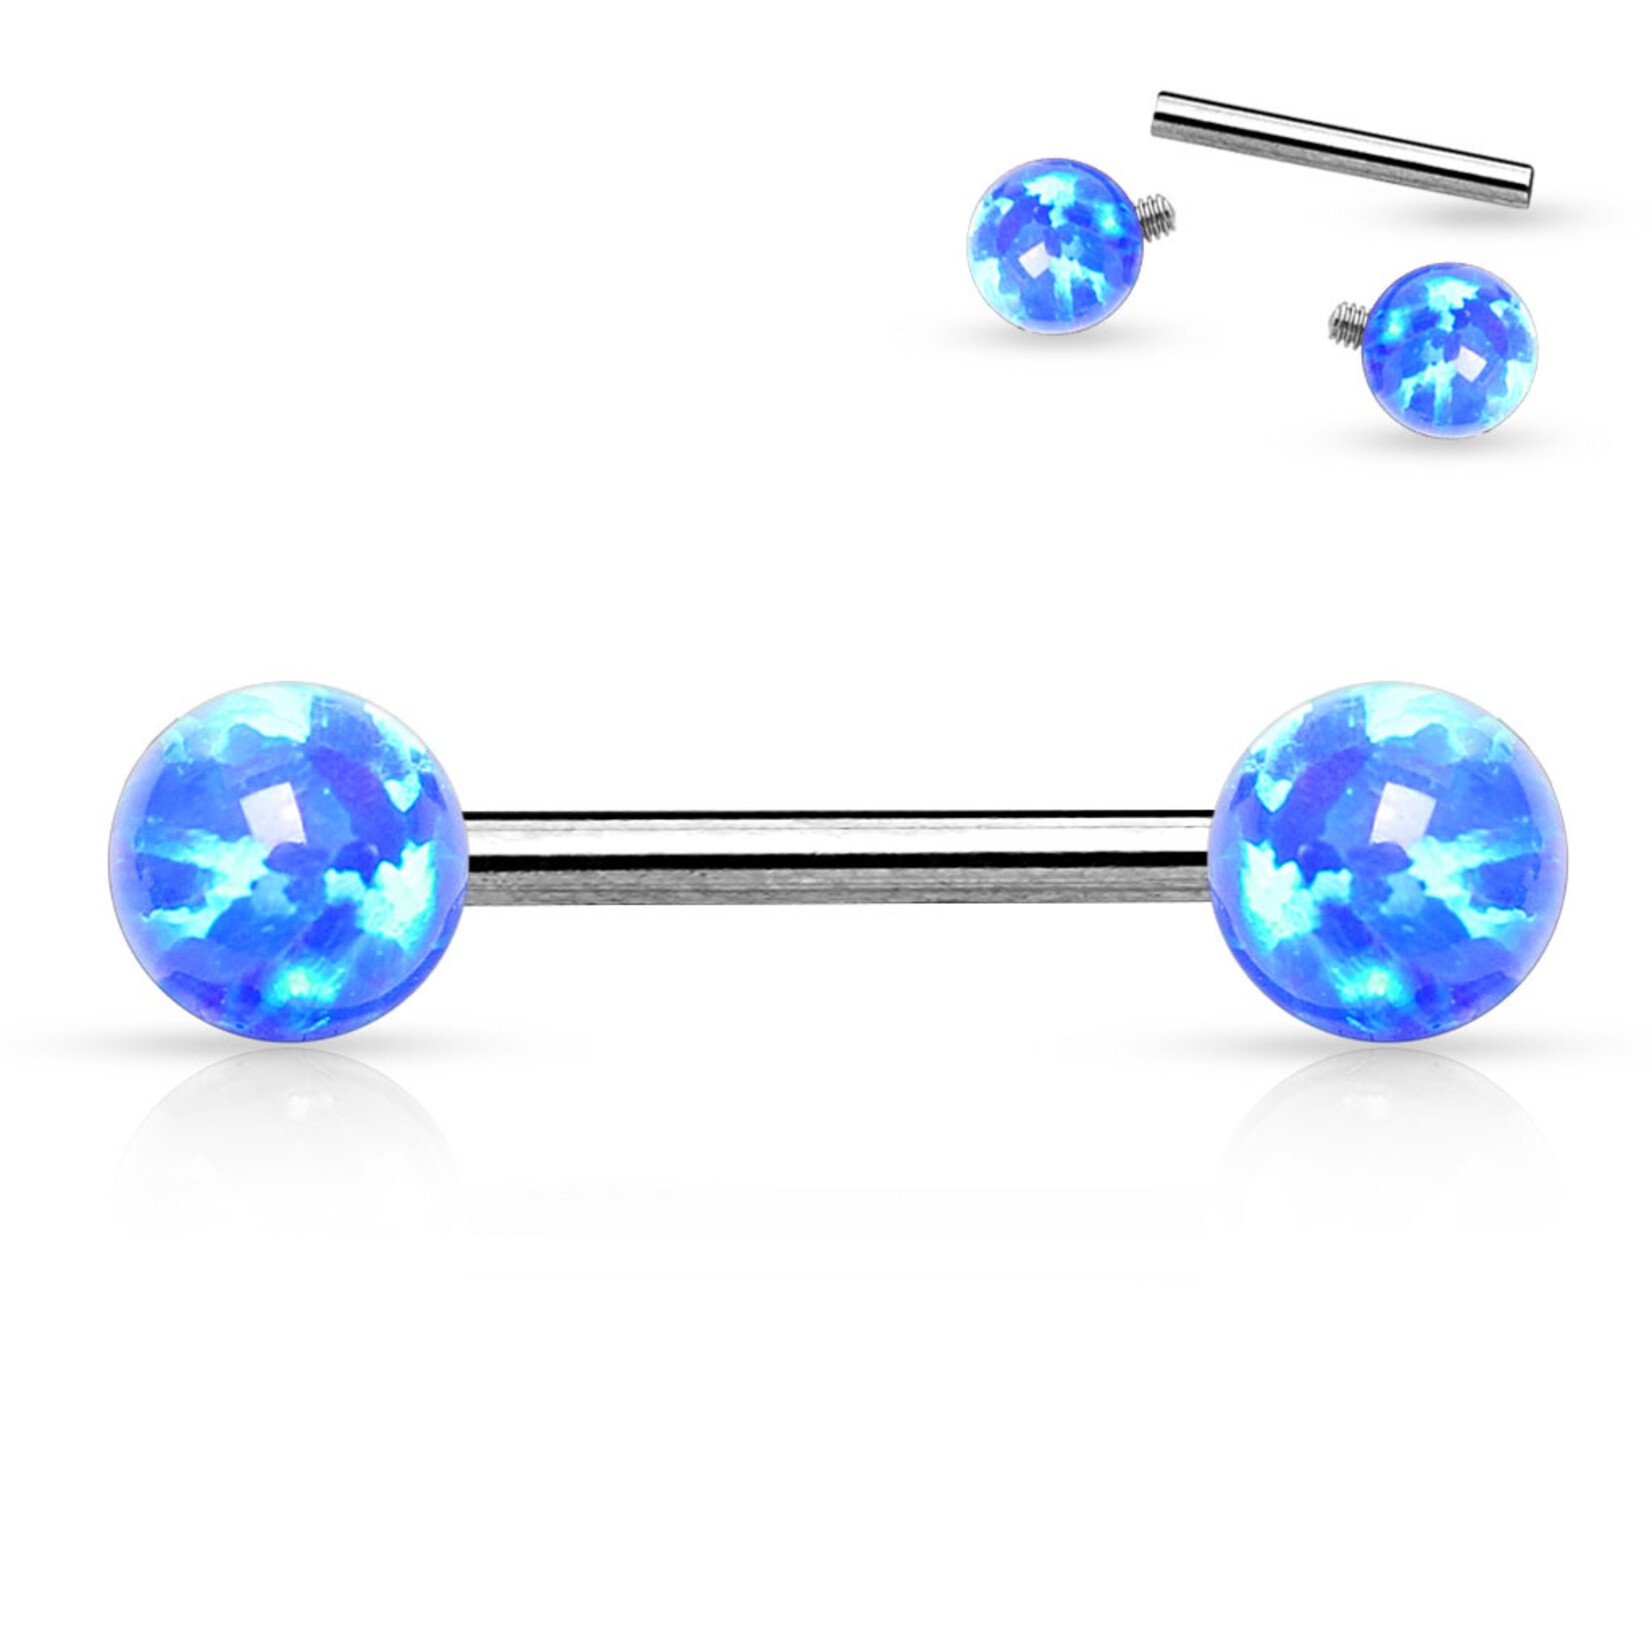 Hollywood Body Jewelry Opal Balls Both Sides Barbell